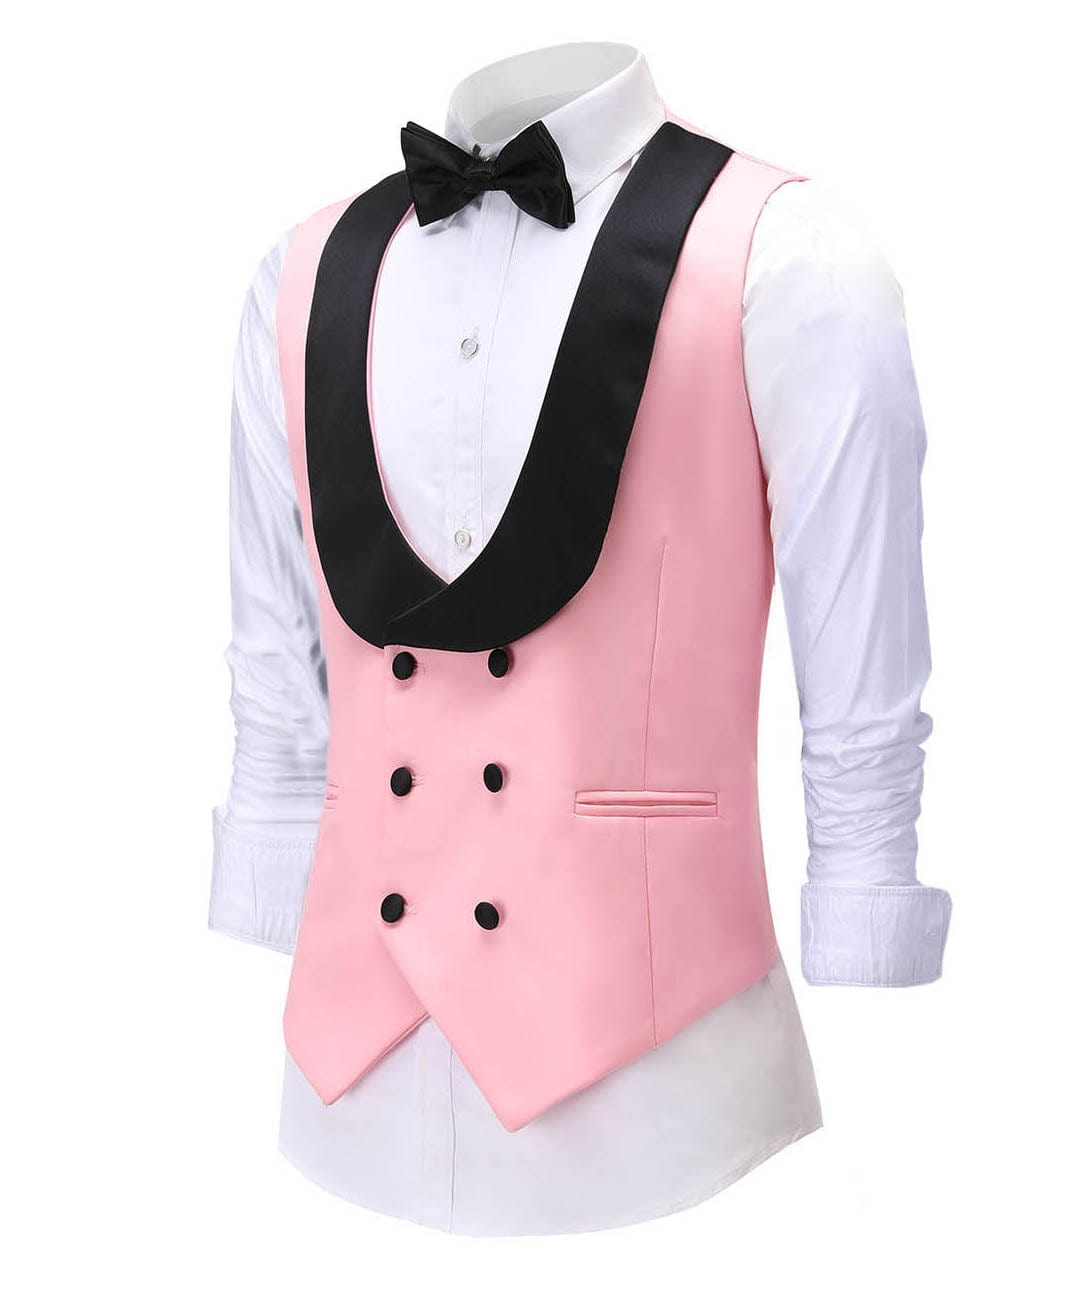 aesido Double Breasted Shawl Lapel Suit Vest